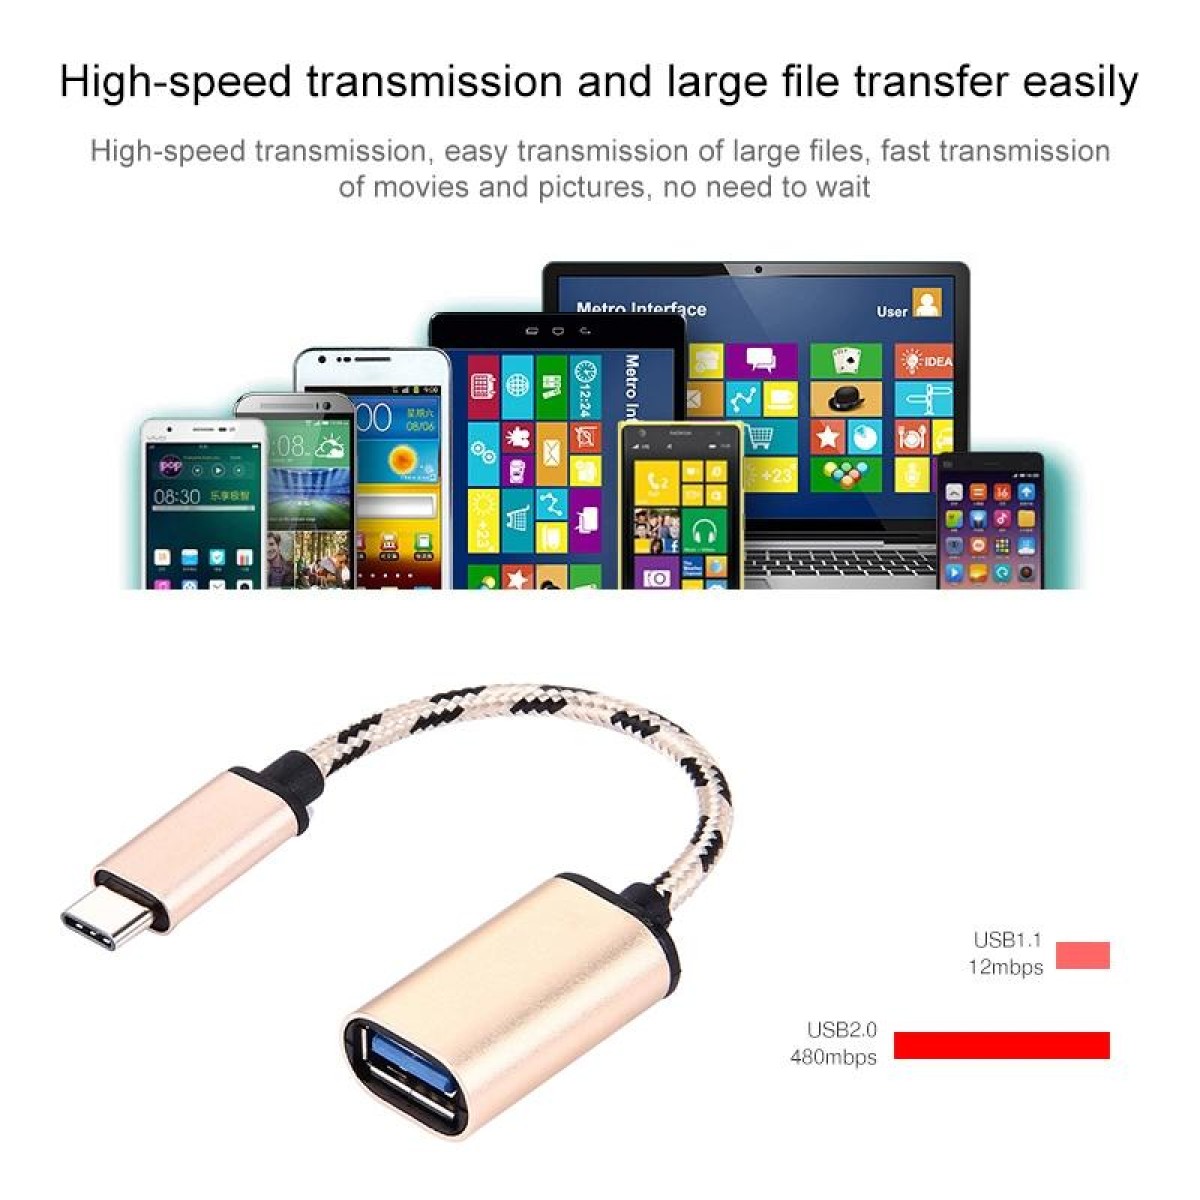 15cm Woven Style Metal Head USB-C / Type-C Male to USB 2.0 Female Data Cable(Gold)